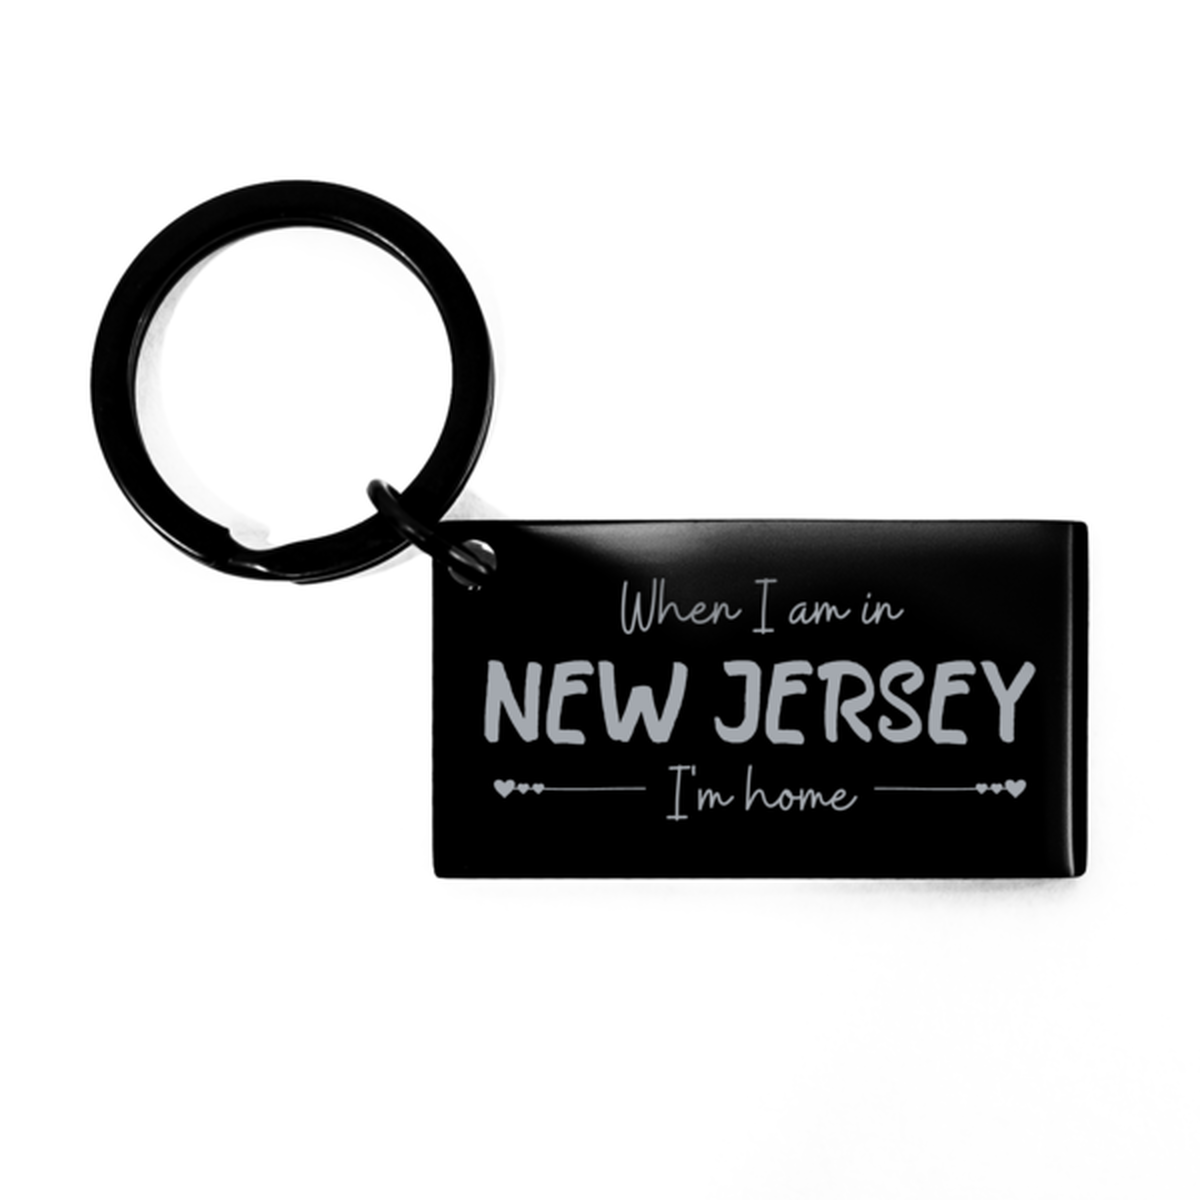 When I am in New Jersey I'm home Keychain, Cheap Gifts For New Jersey, State New Jersey Birthday Gifts for Friends Coworker